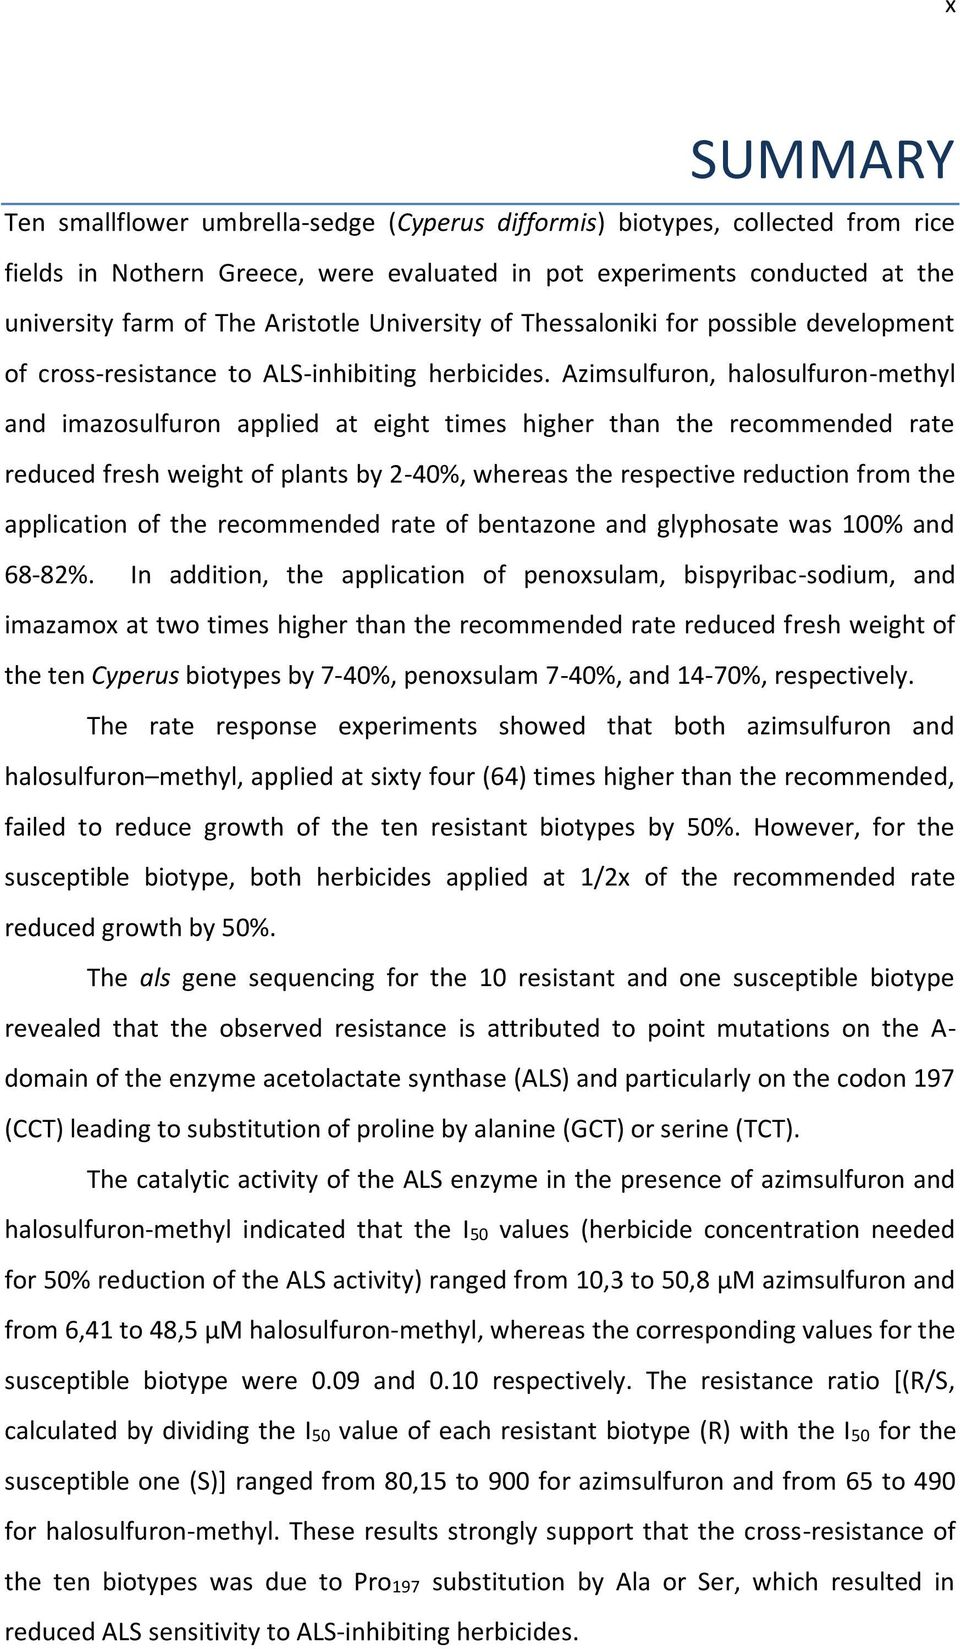 Azimsulfuron, halosulfuron-methyl and imazosulfuron applied at eight times higher than the recommended rate reduced fresh weight of plants by 2-40%, whereas the respective reduction from the